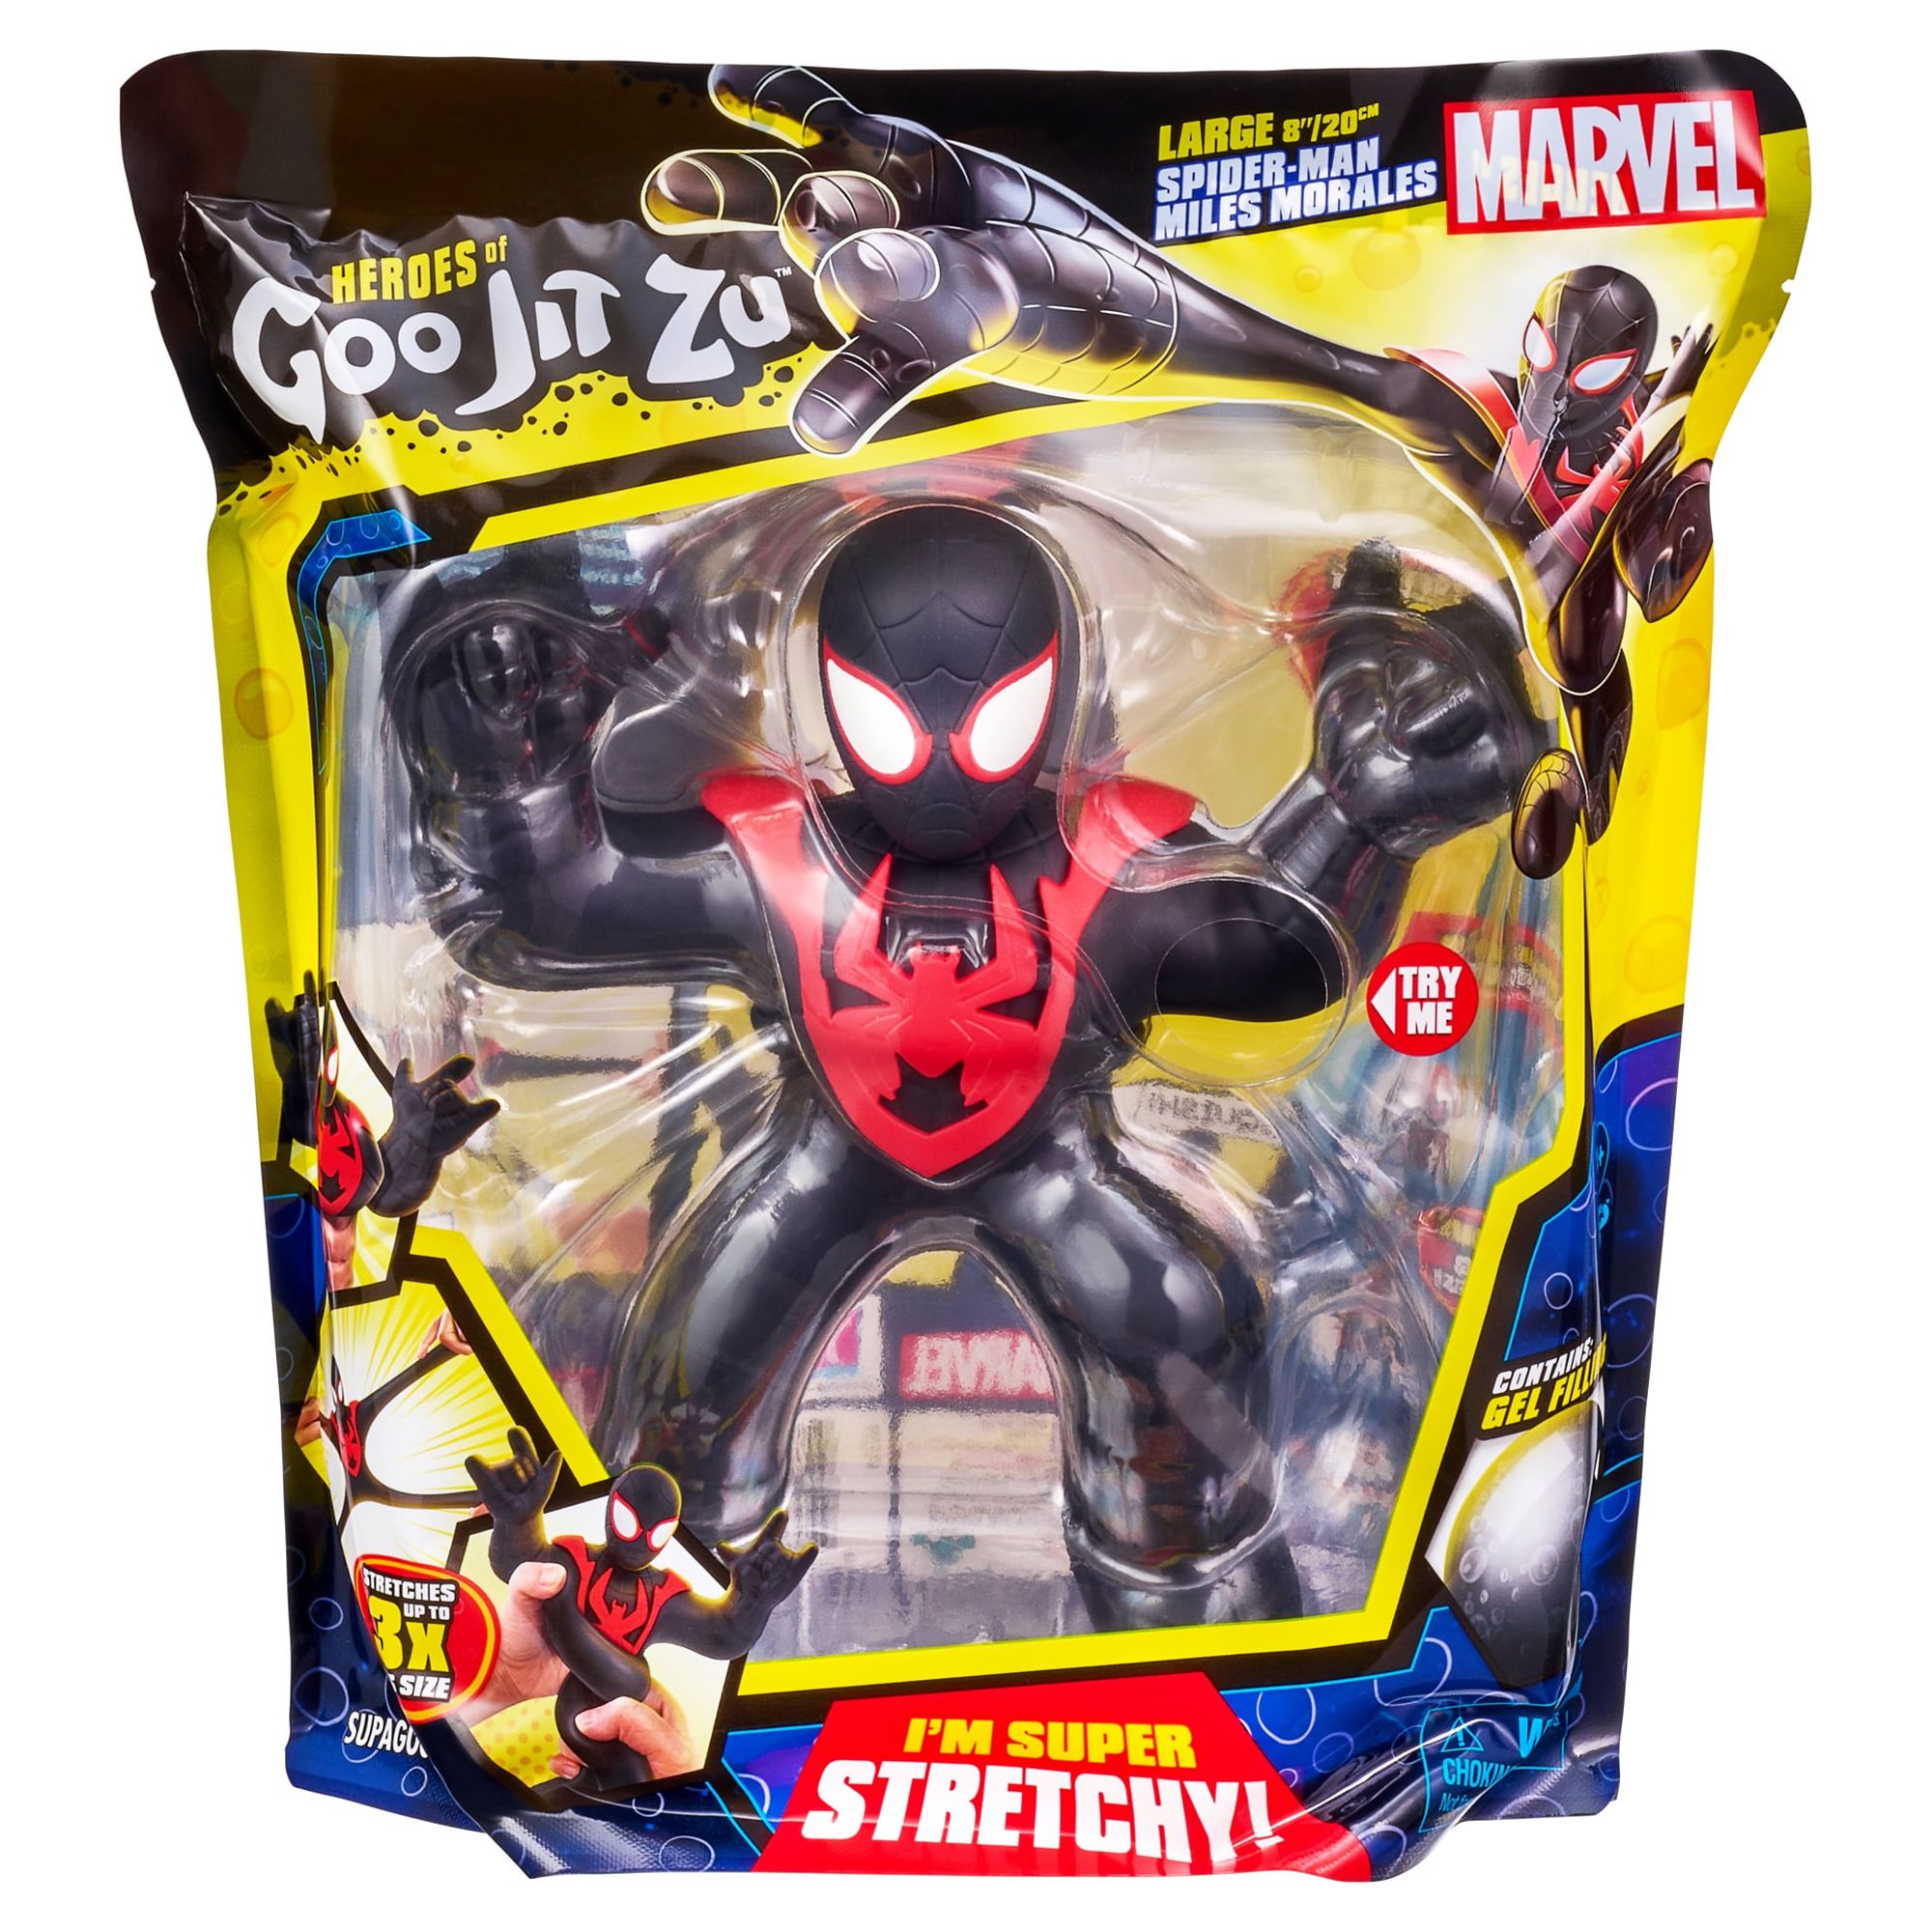 Heroes Of Goo Jit Zu Marvel Supagoo Super Stretchy Spider-Man Miles Morales Multicolor Action Figure - image 4 of 10